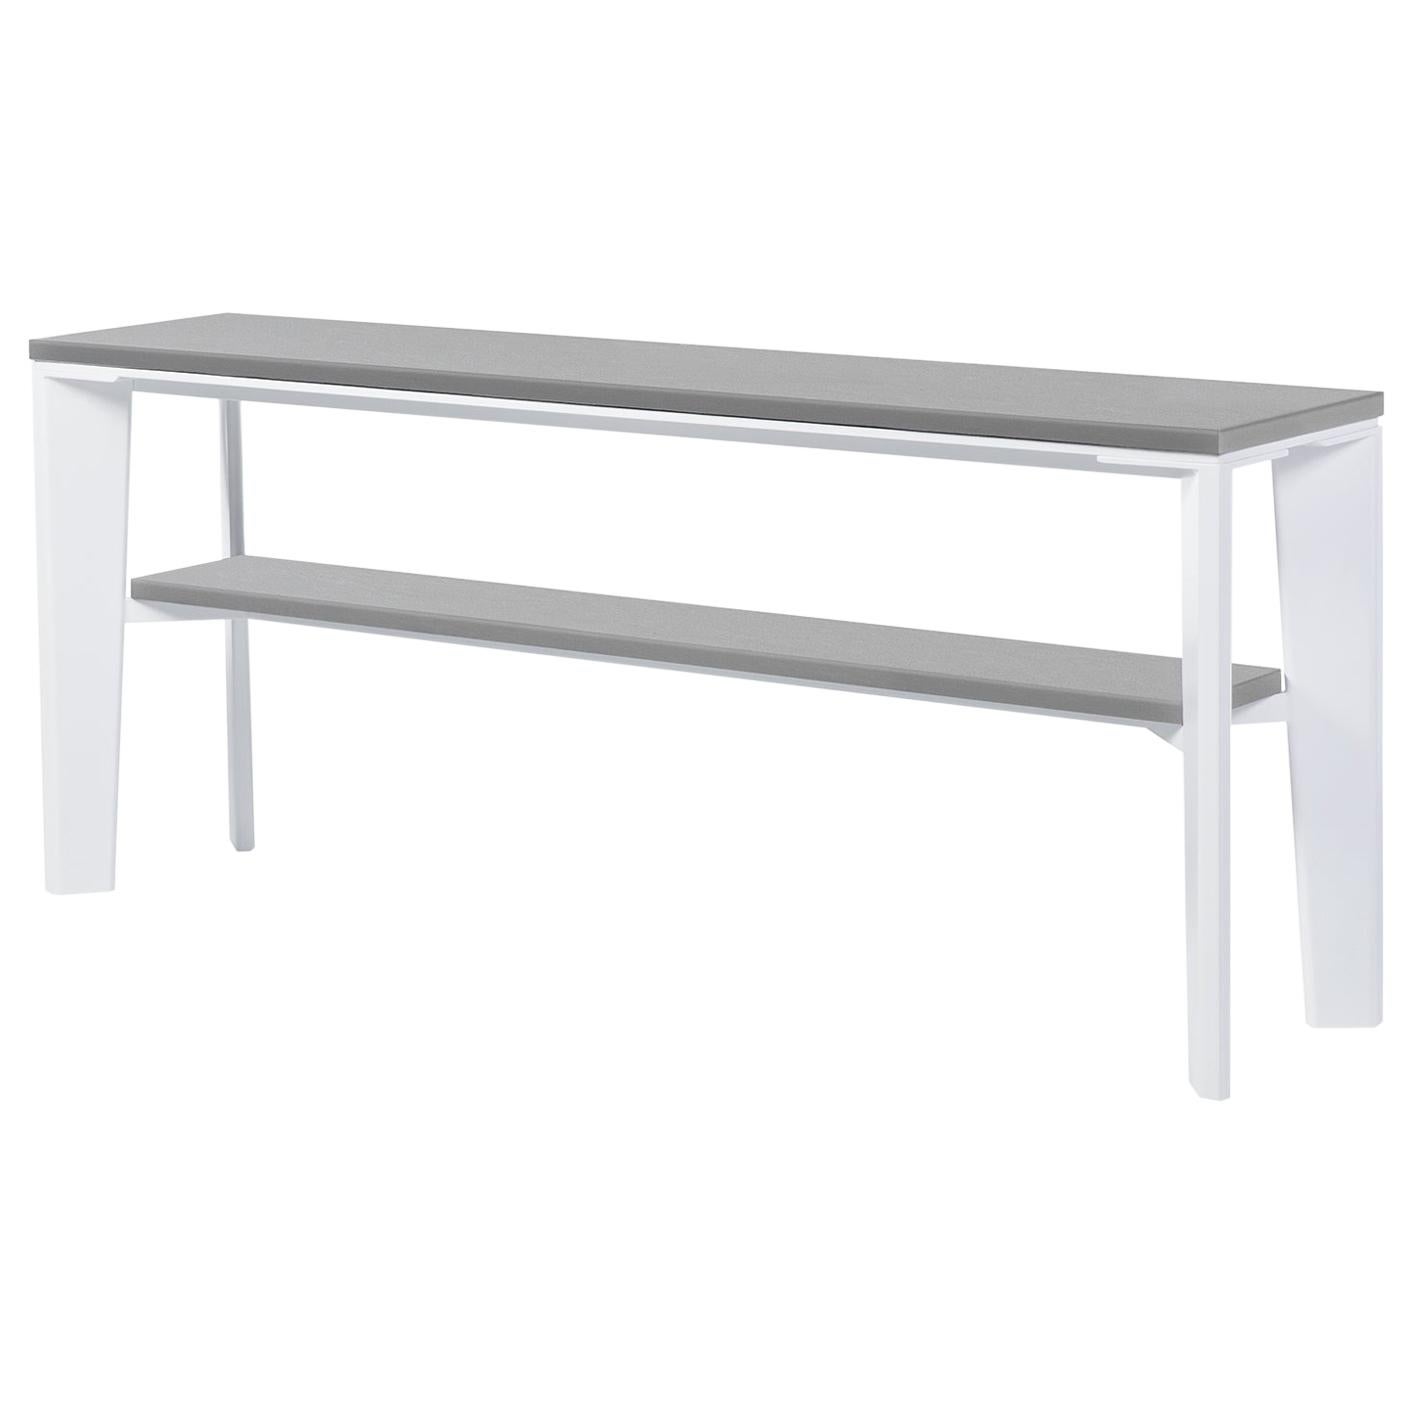 HOLLY HUNT Outdoor Keel Console with Pearl Metal Frame & Belgium Fog Stone Top